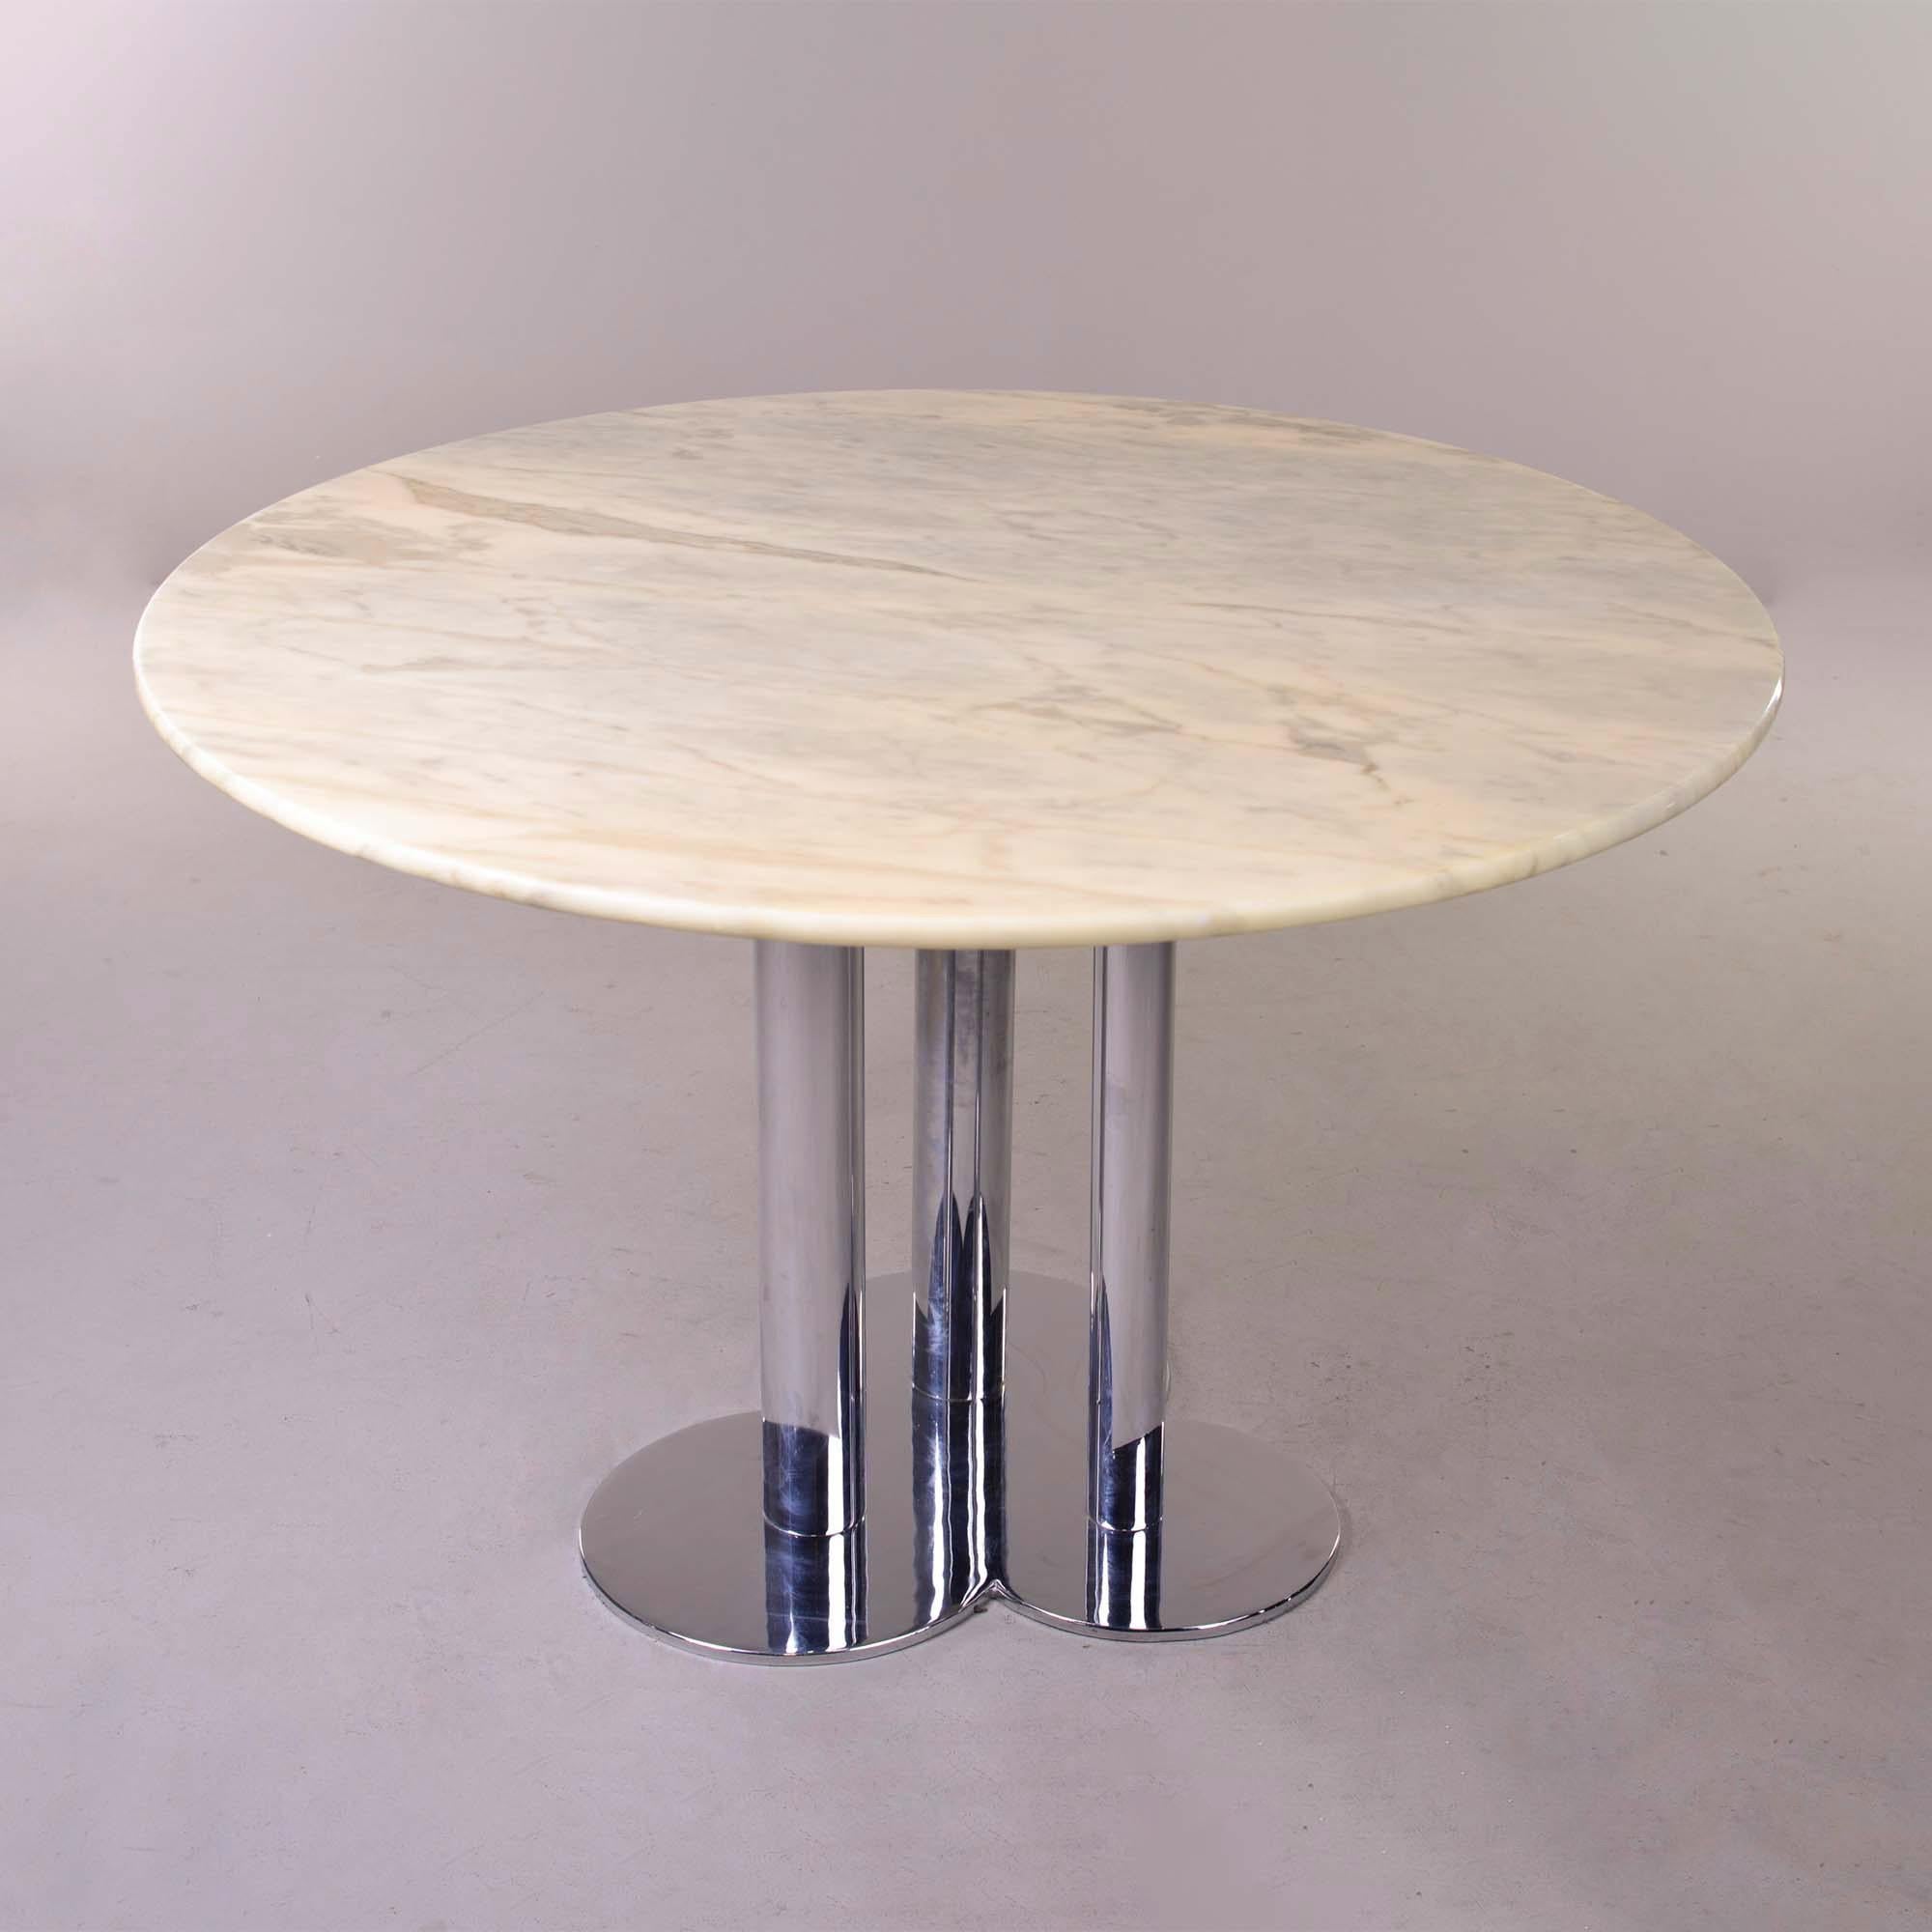 Circa 1960s table by Sergio Asti for Poltro Nova features three polished chrome legs on a trefoil form base and a creamy white and gray 45” diameter round marble top. Versatile size - works as a center table or dining table for an urban apartment,